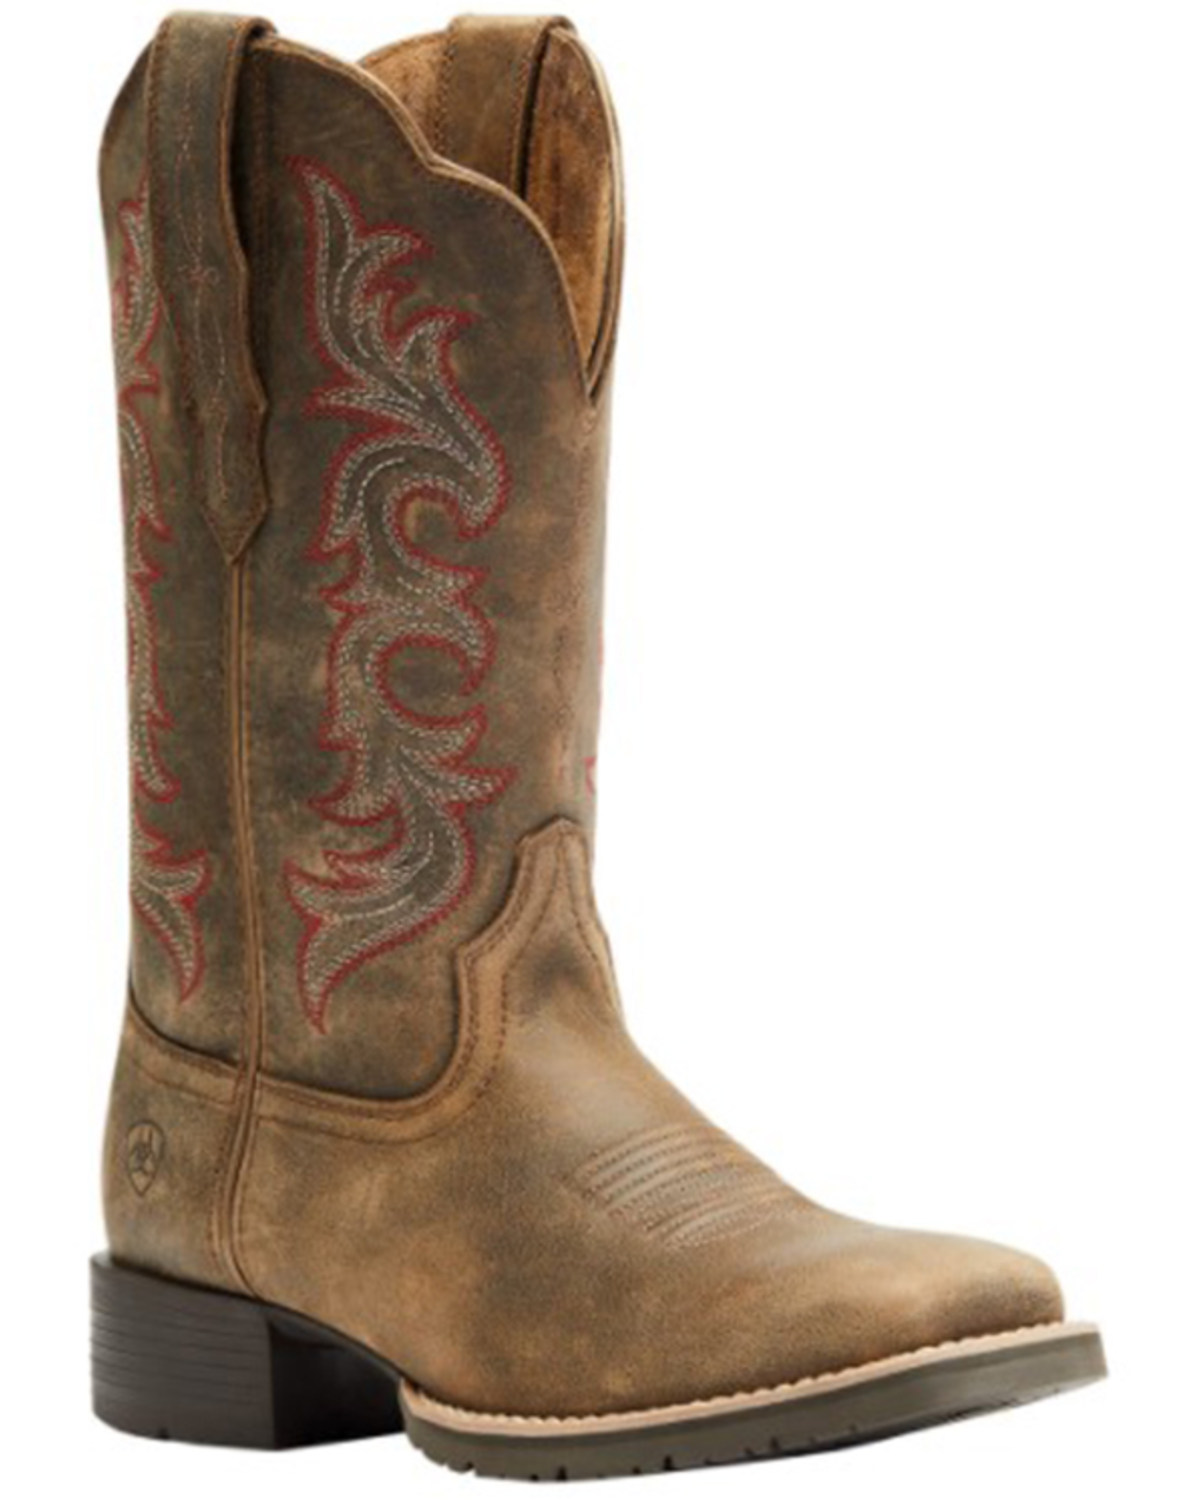 Ariat Women's Hybrid Rancher Stretchfit Roper Western Boots - Broad Square Toe